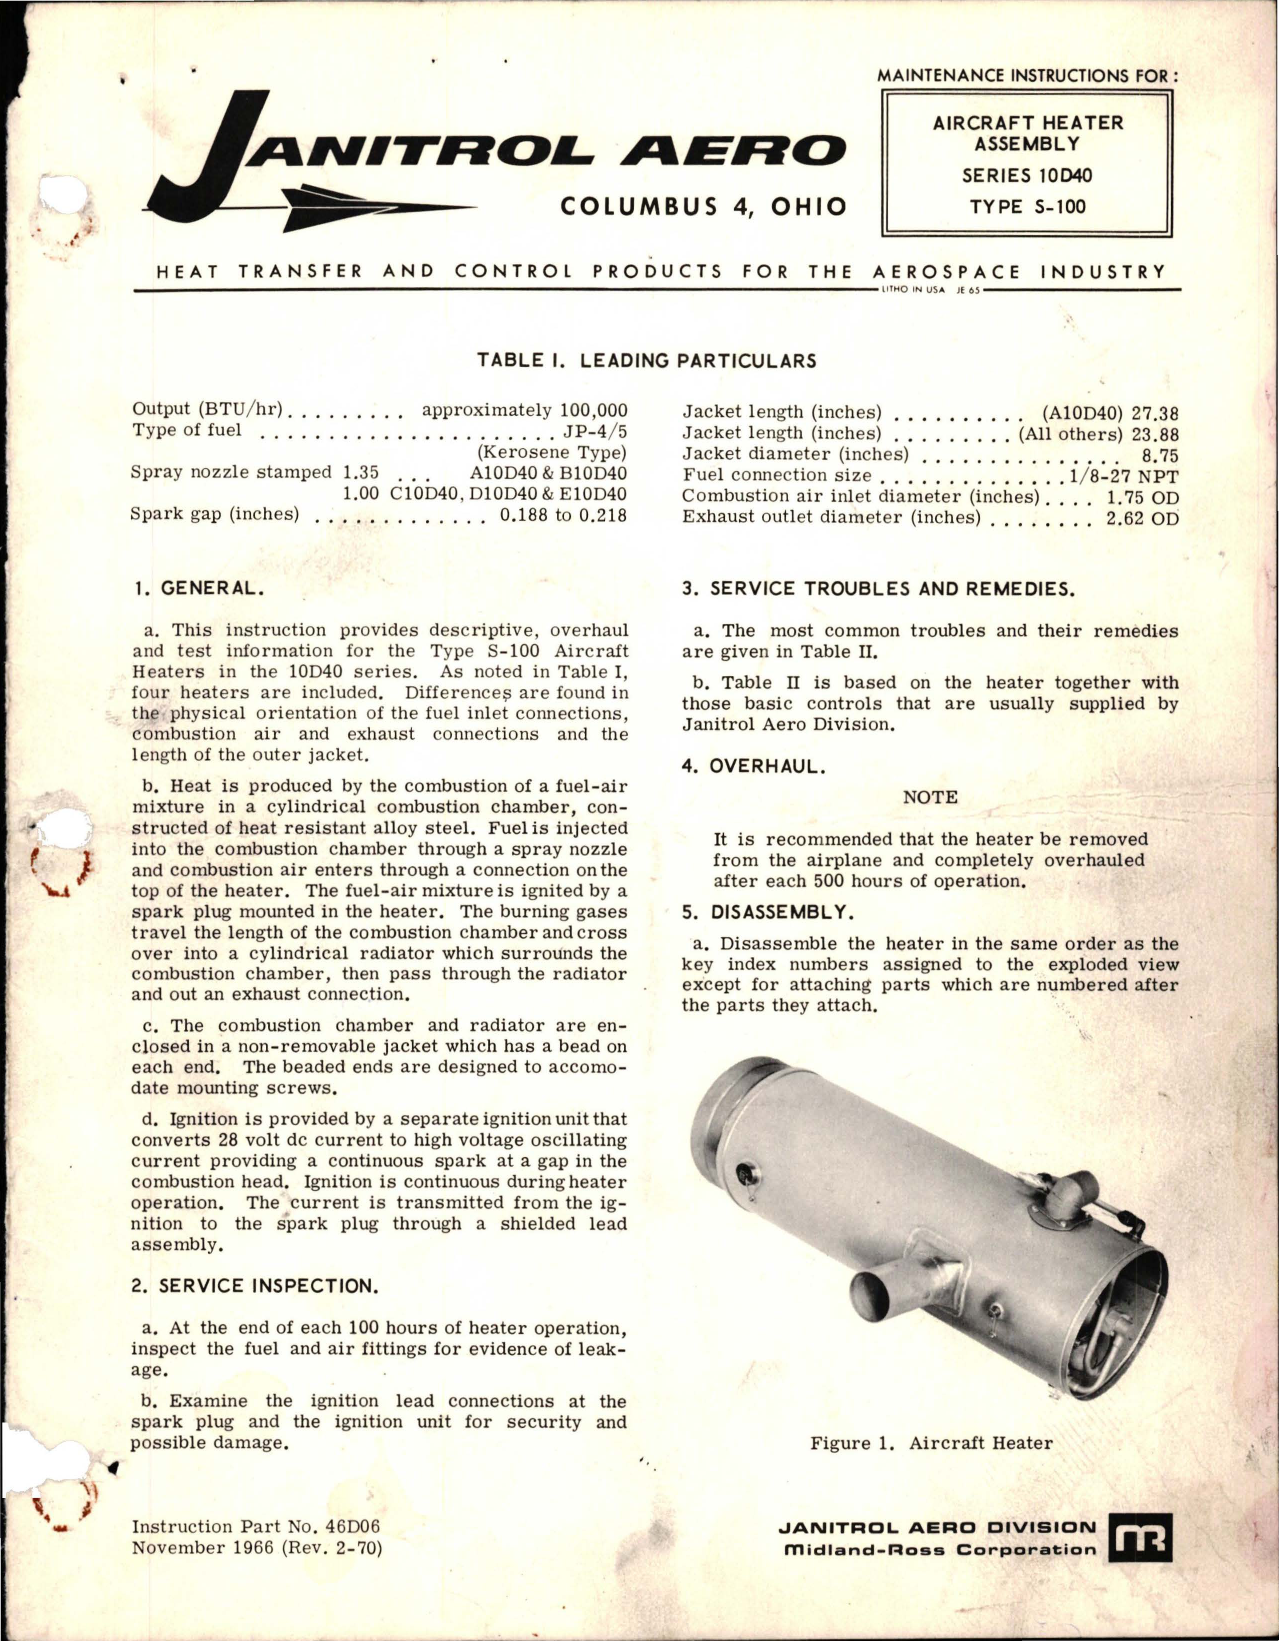 Sample page 1 from AirCorps Library document: Maintenance Instructions for Heater Assembly - Series 10D40 - Type S-100